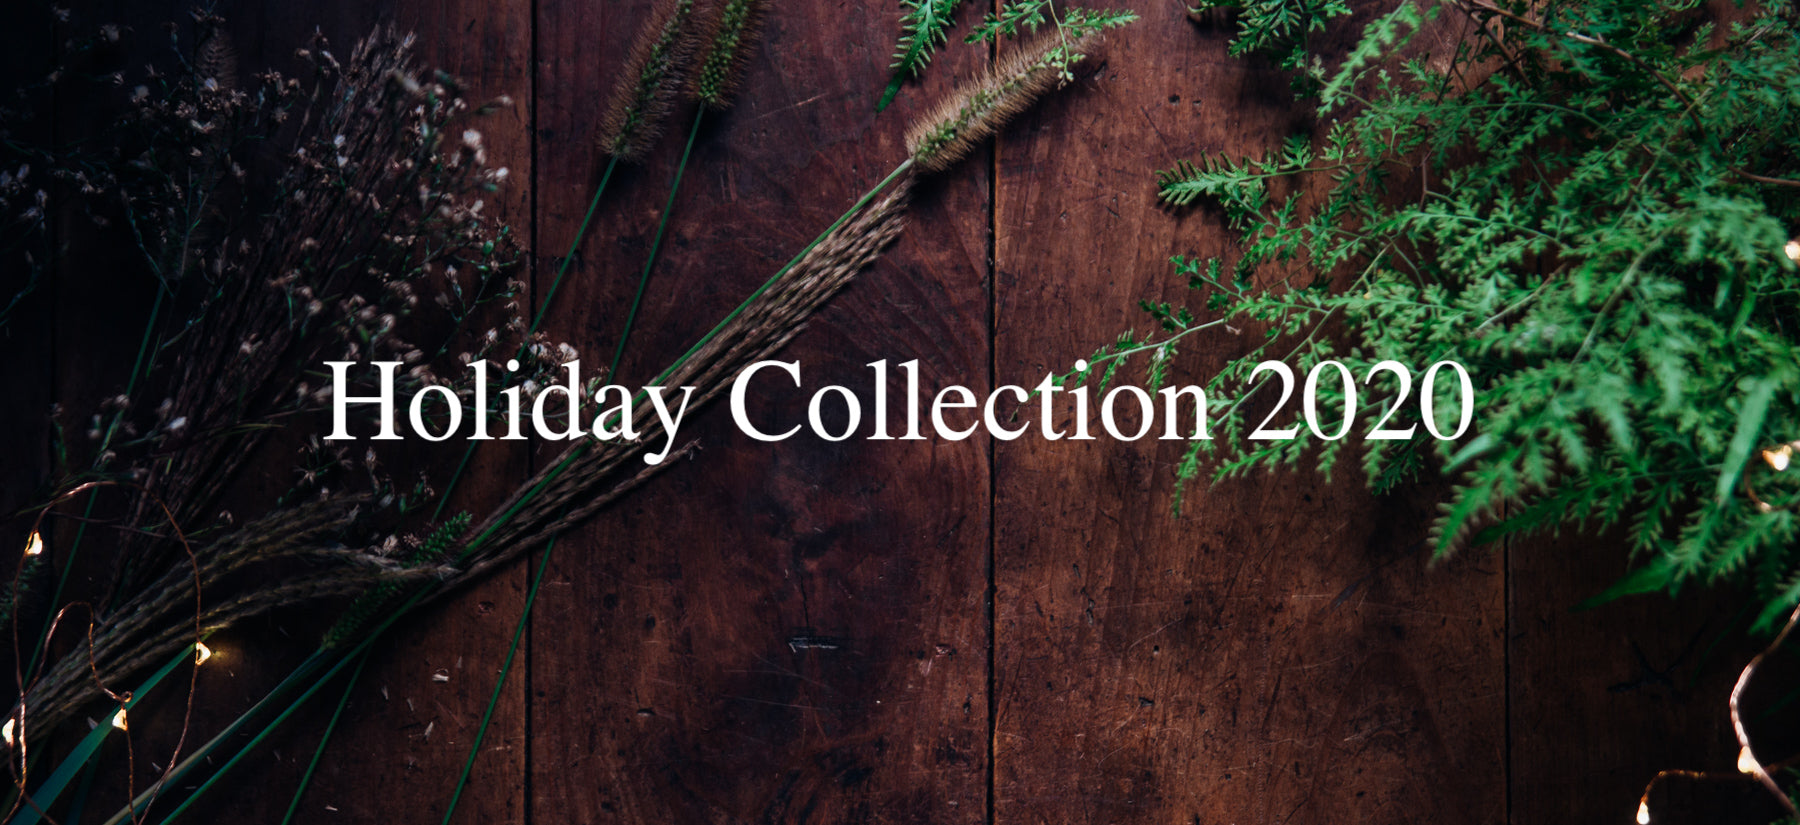 Theme: Holiday Collection 2020